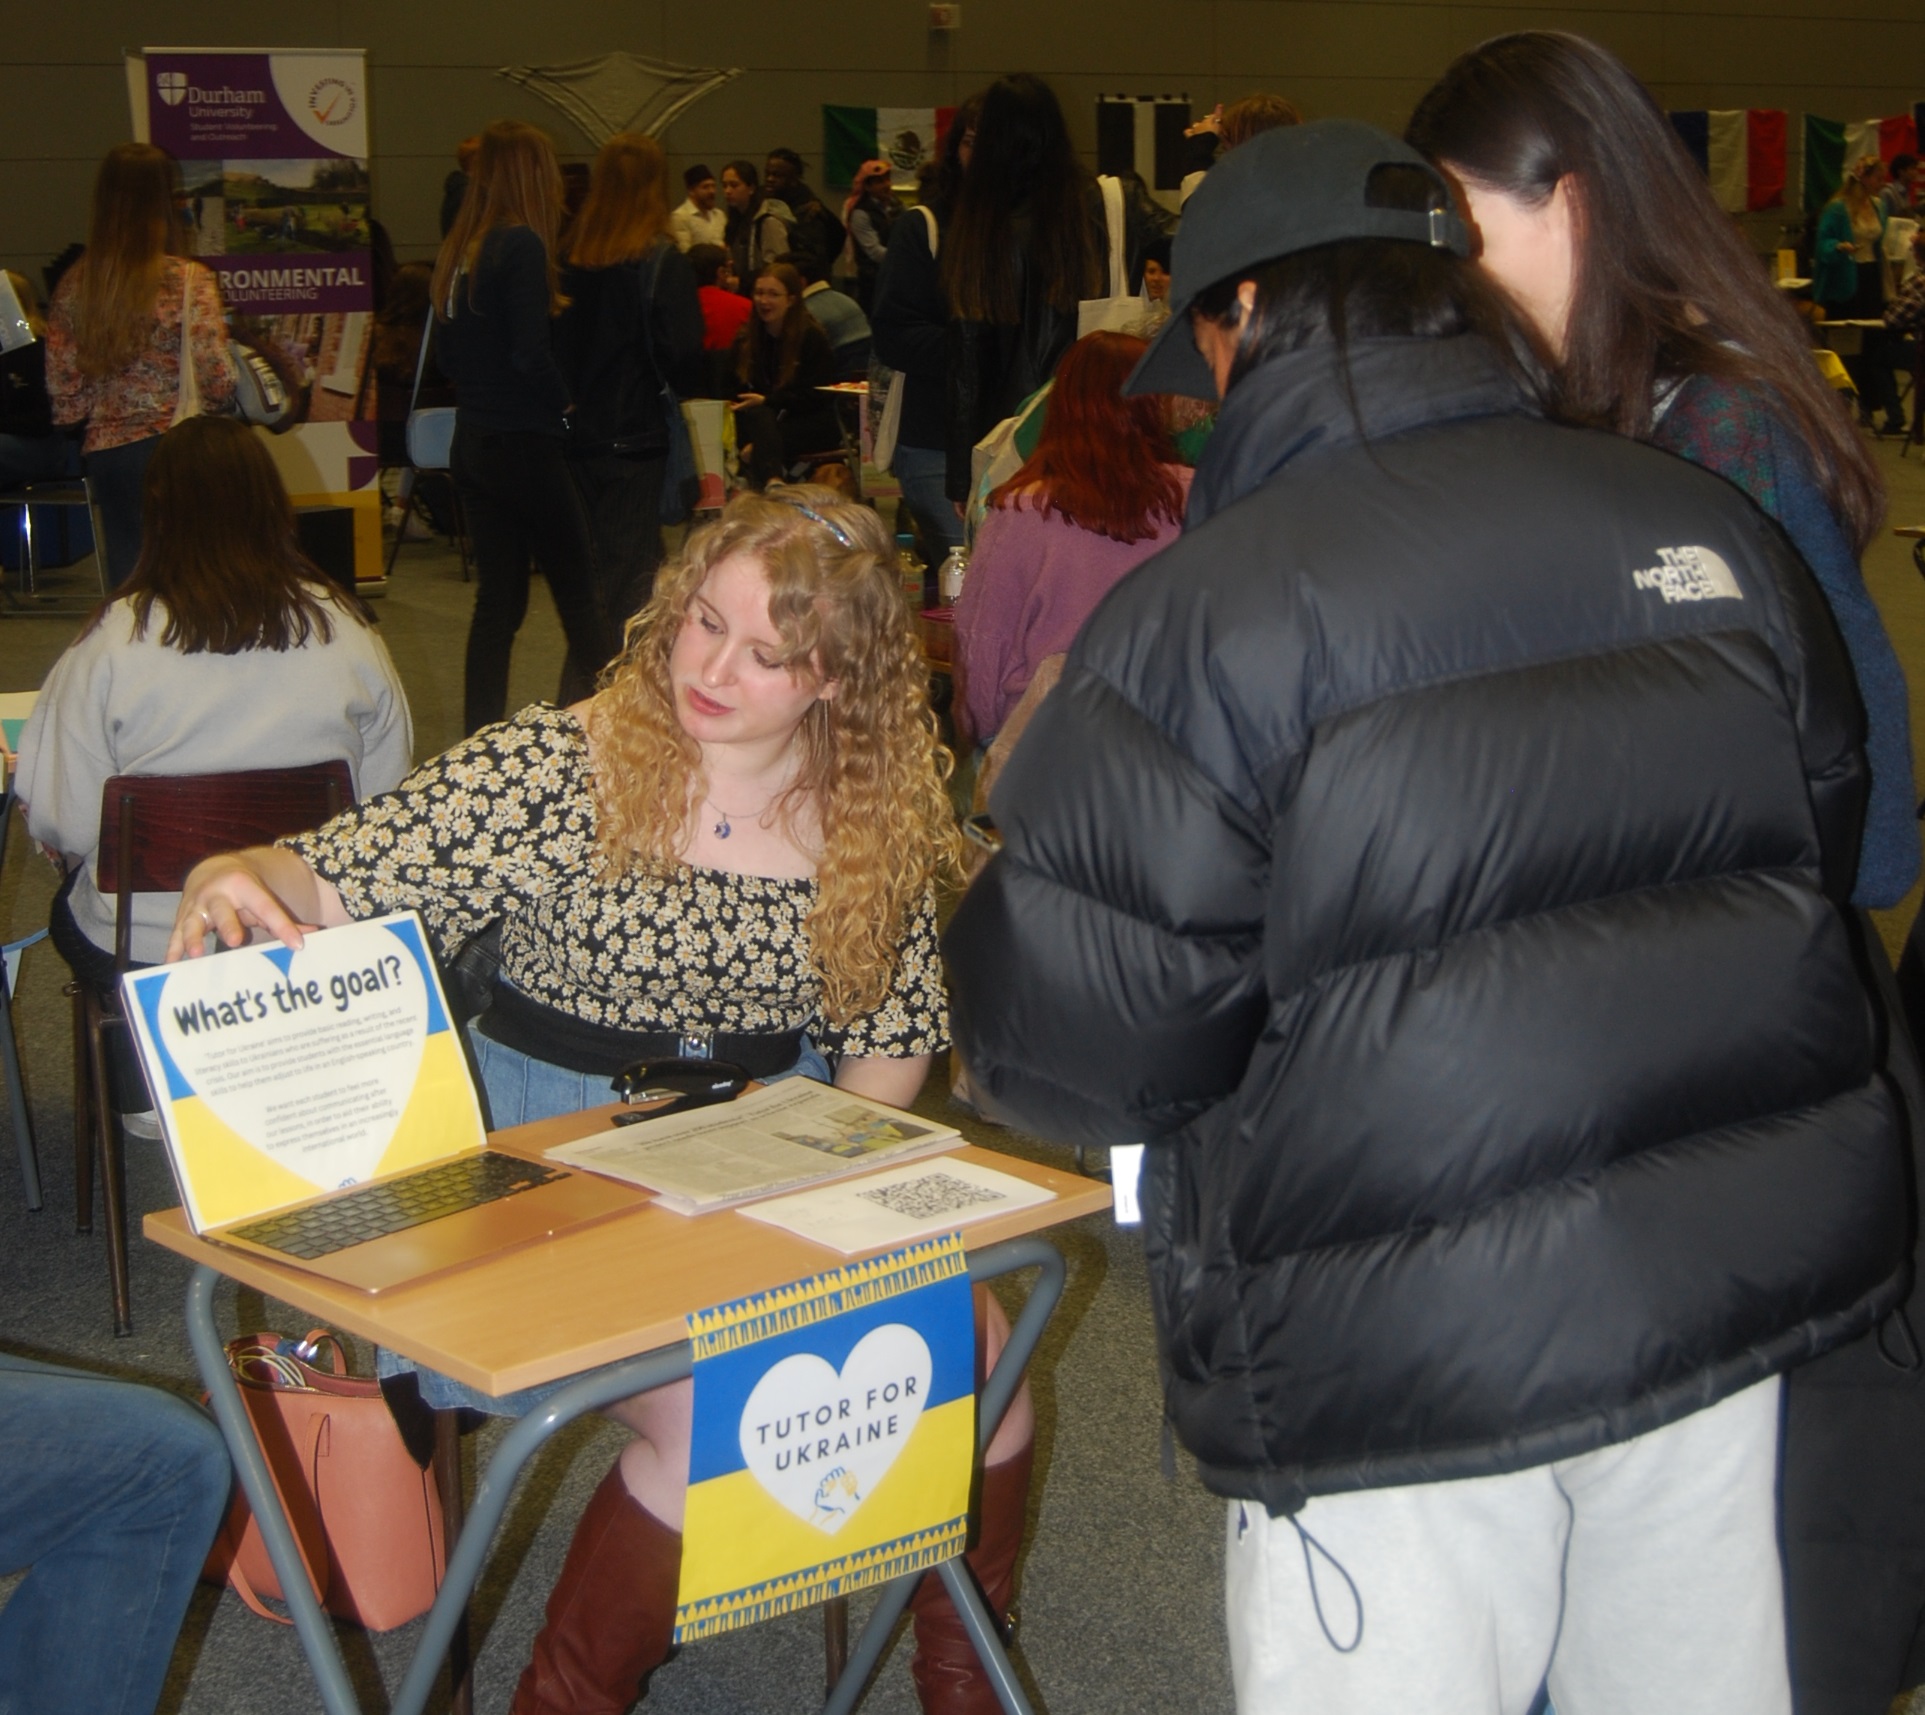 The Tutor for Ukraine project leader talking to two students at the Freshers' Fair